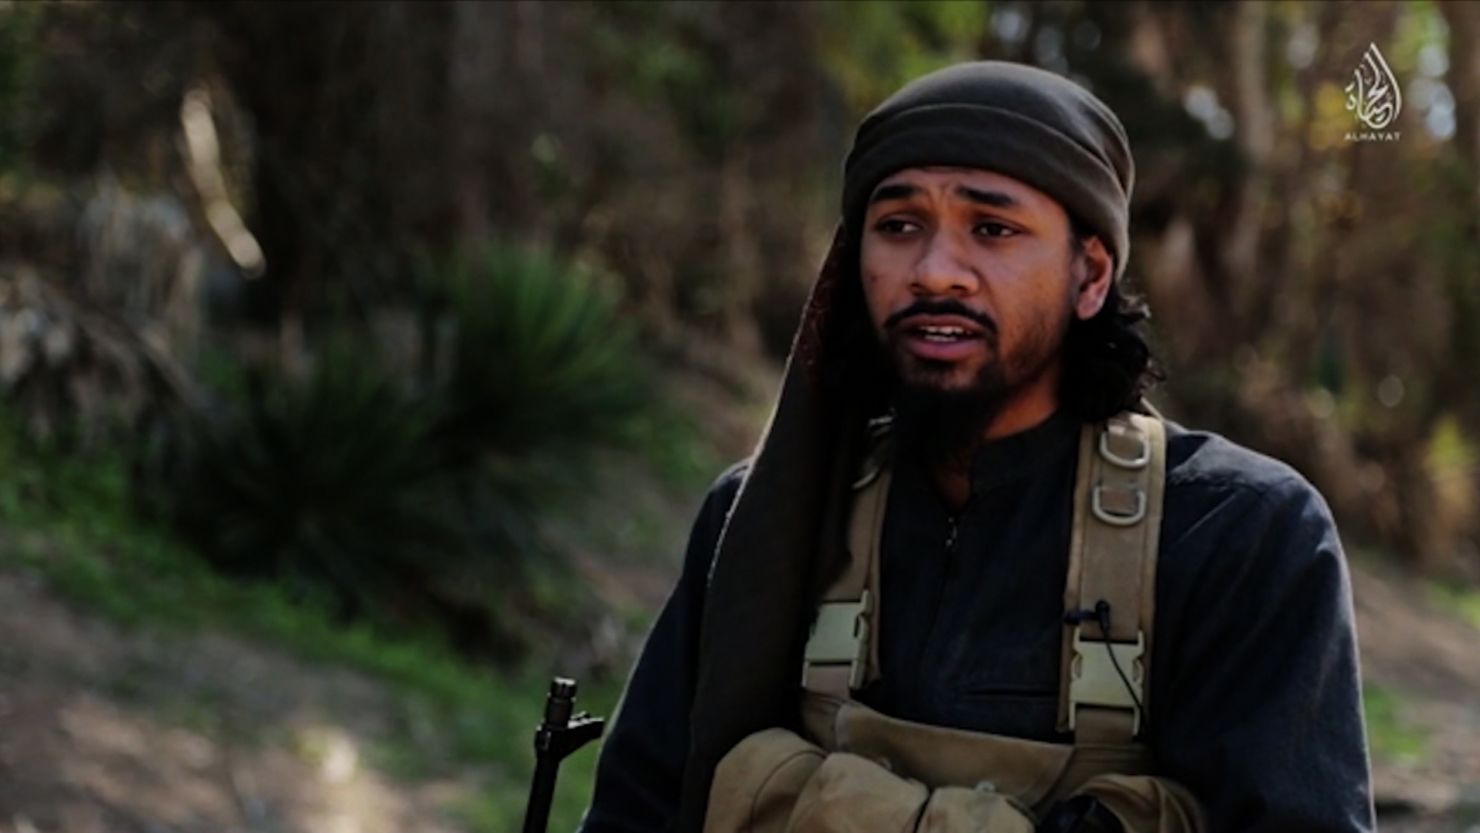 Neil Prakash speaks in a promotional video for ISIS.